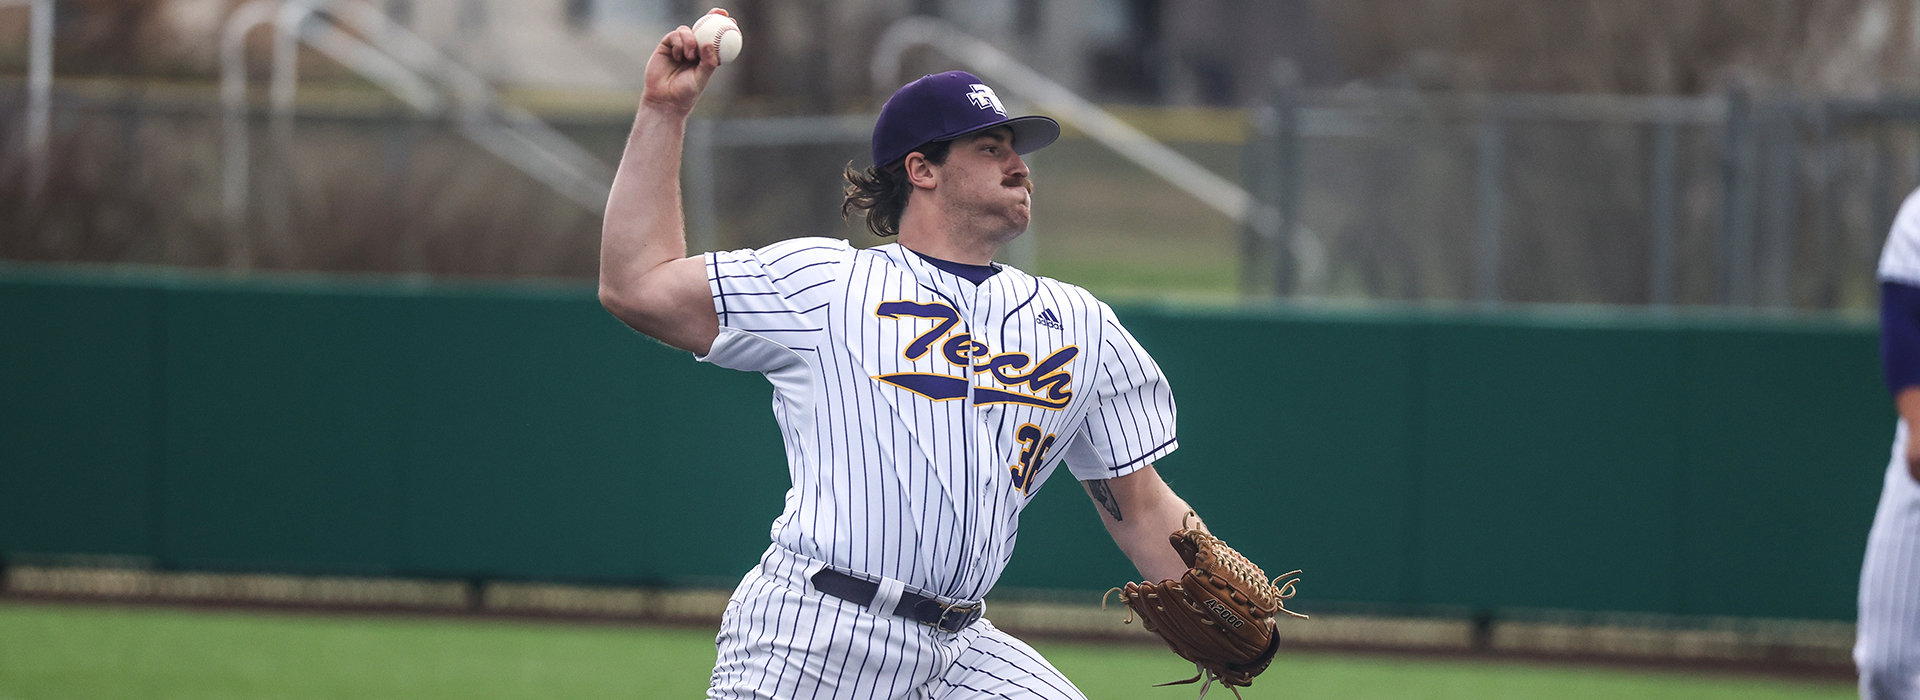 Smiddy locks down second OVC Pitcher of the Week nod behind shutout